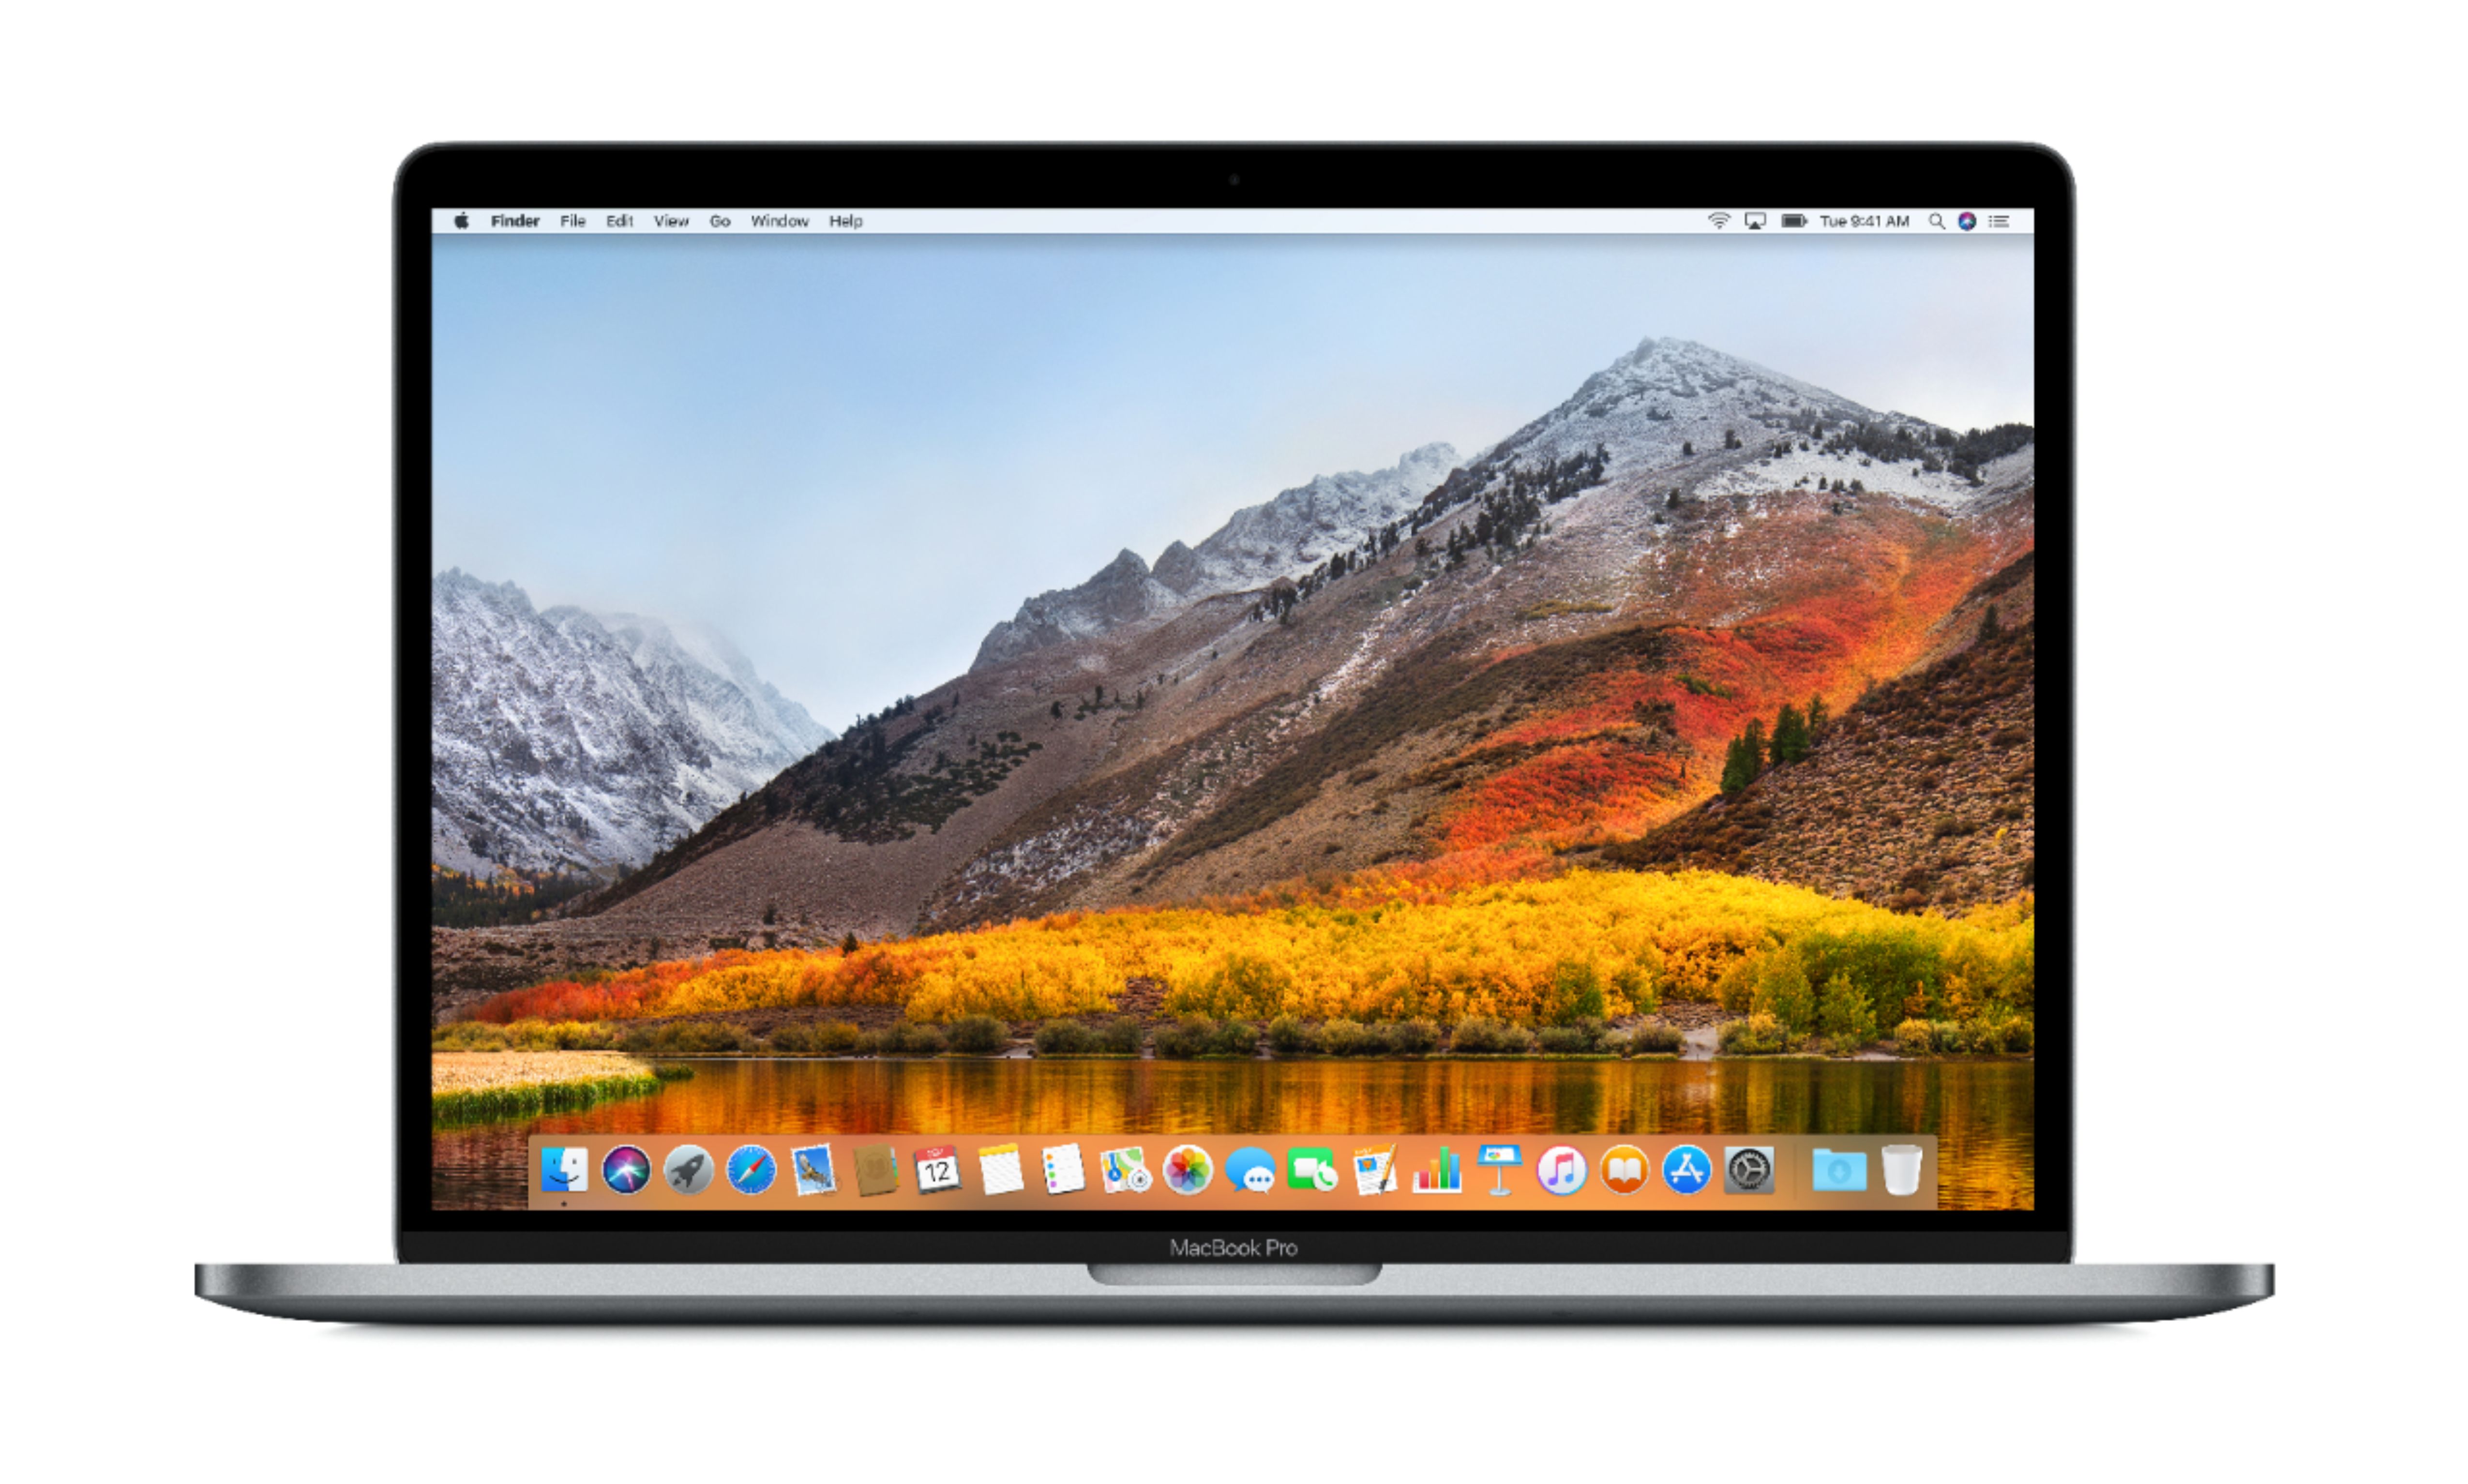 Apple MacBook Pro® 15.4 Display Intel Core i7 16 GB Memory 1TB Solid State  Drive Space Gray Z0UC4LL/A - Best Buy